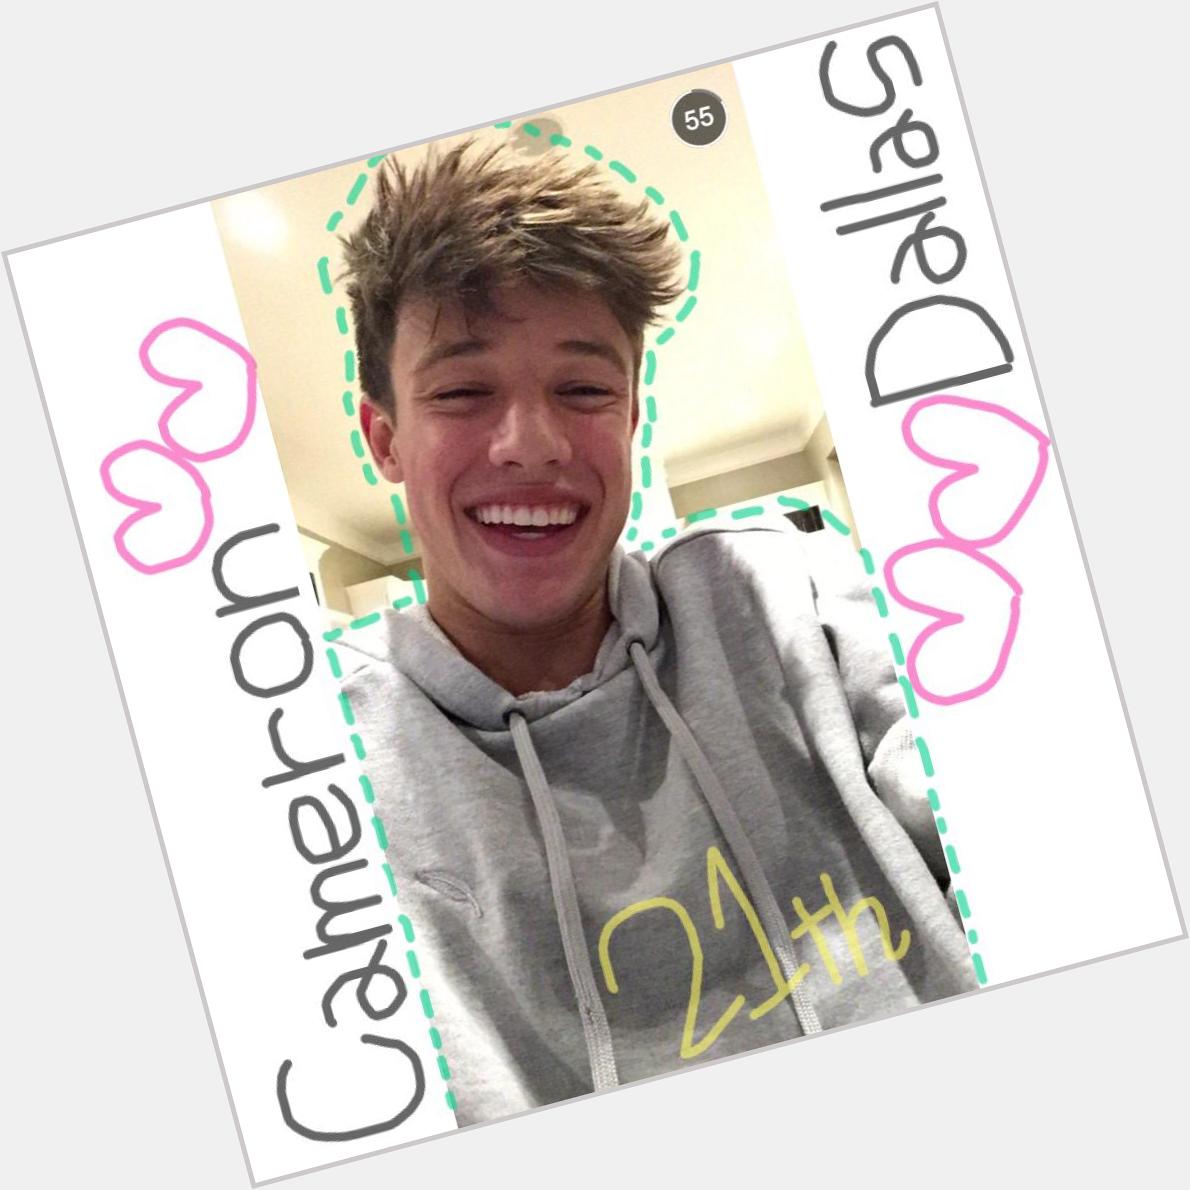 Happy Birthday Cameron Dallas  21th in Japan time(:
I\m so proud of you...
I love you so much       